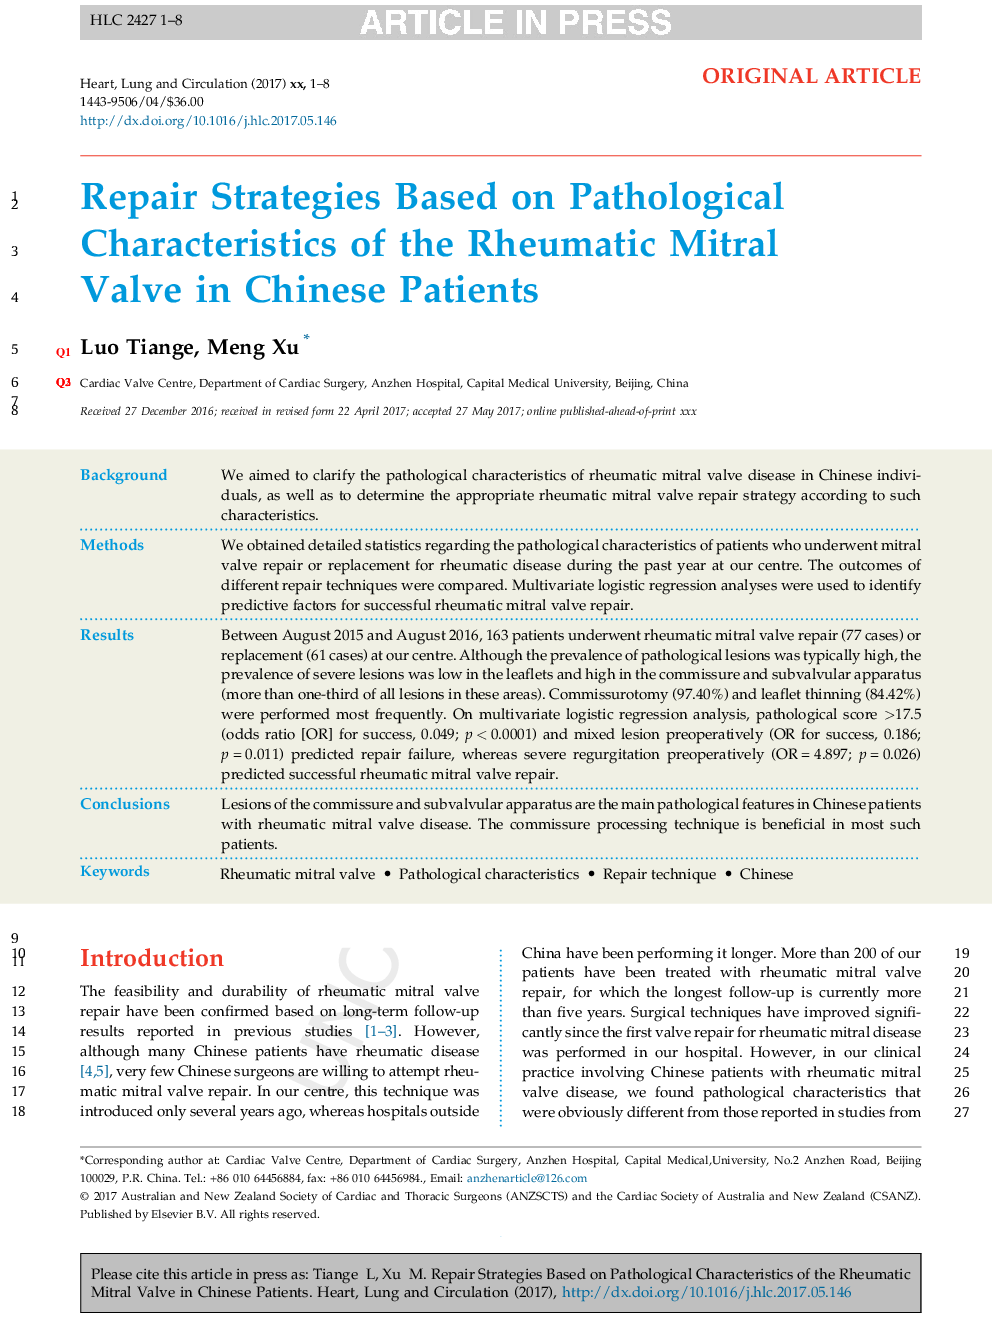 Repair Strategies Based on Pathological Characteristics of the Rheumatic Mitral Valve in Chinese Patients